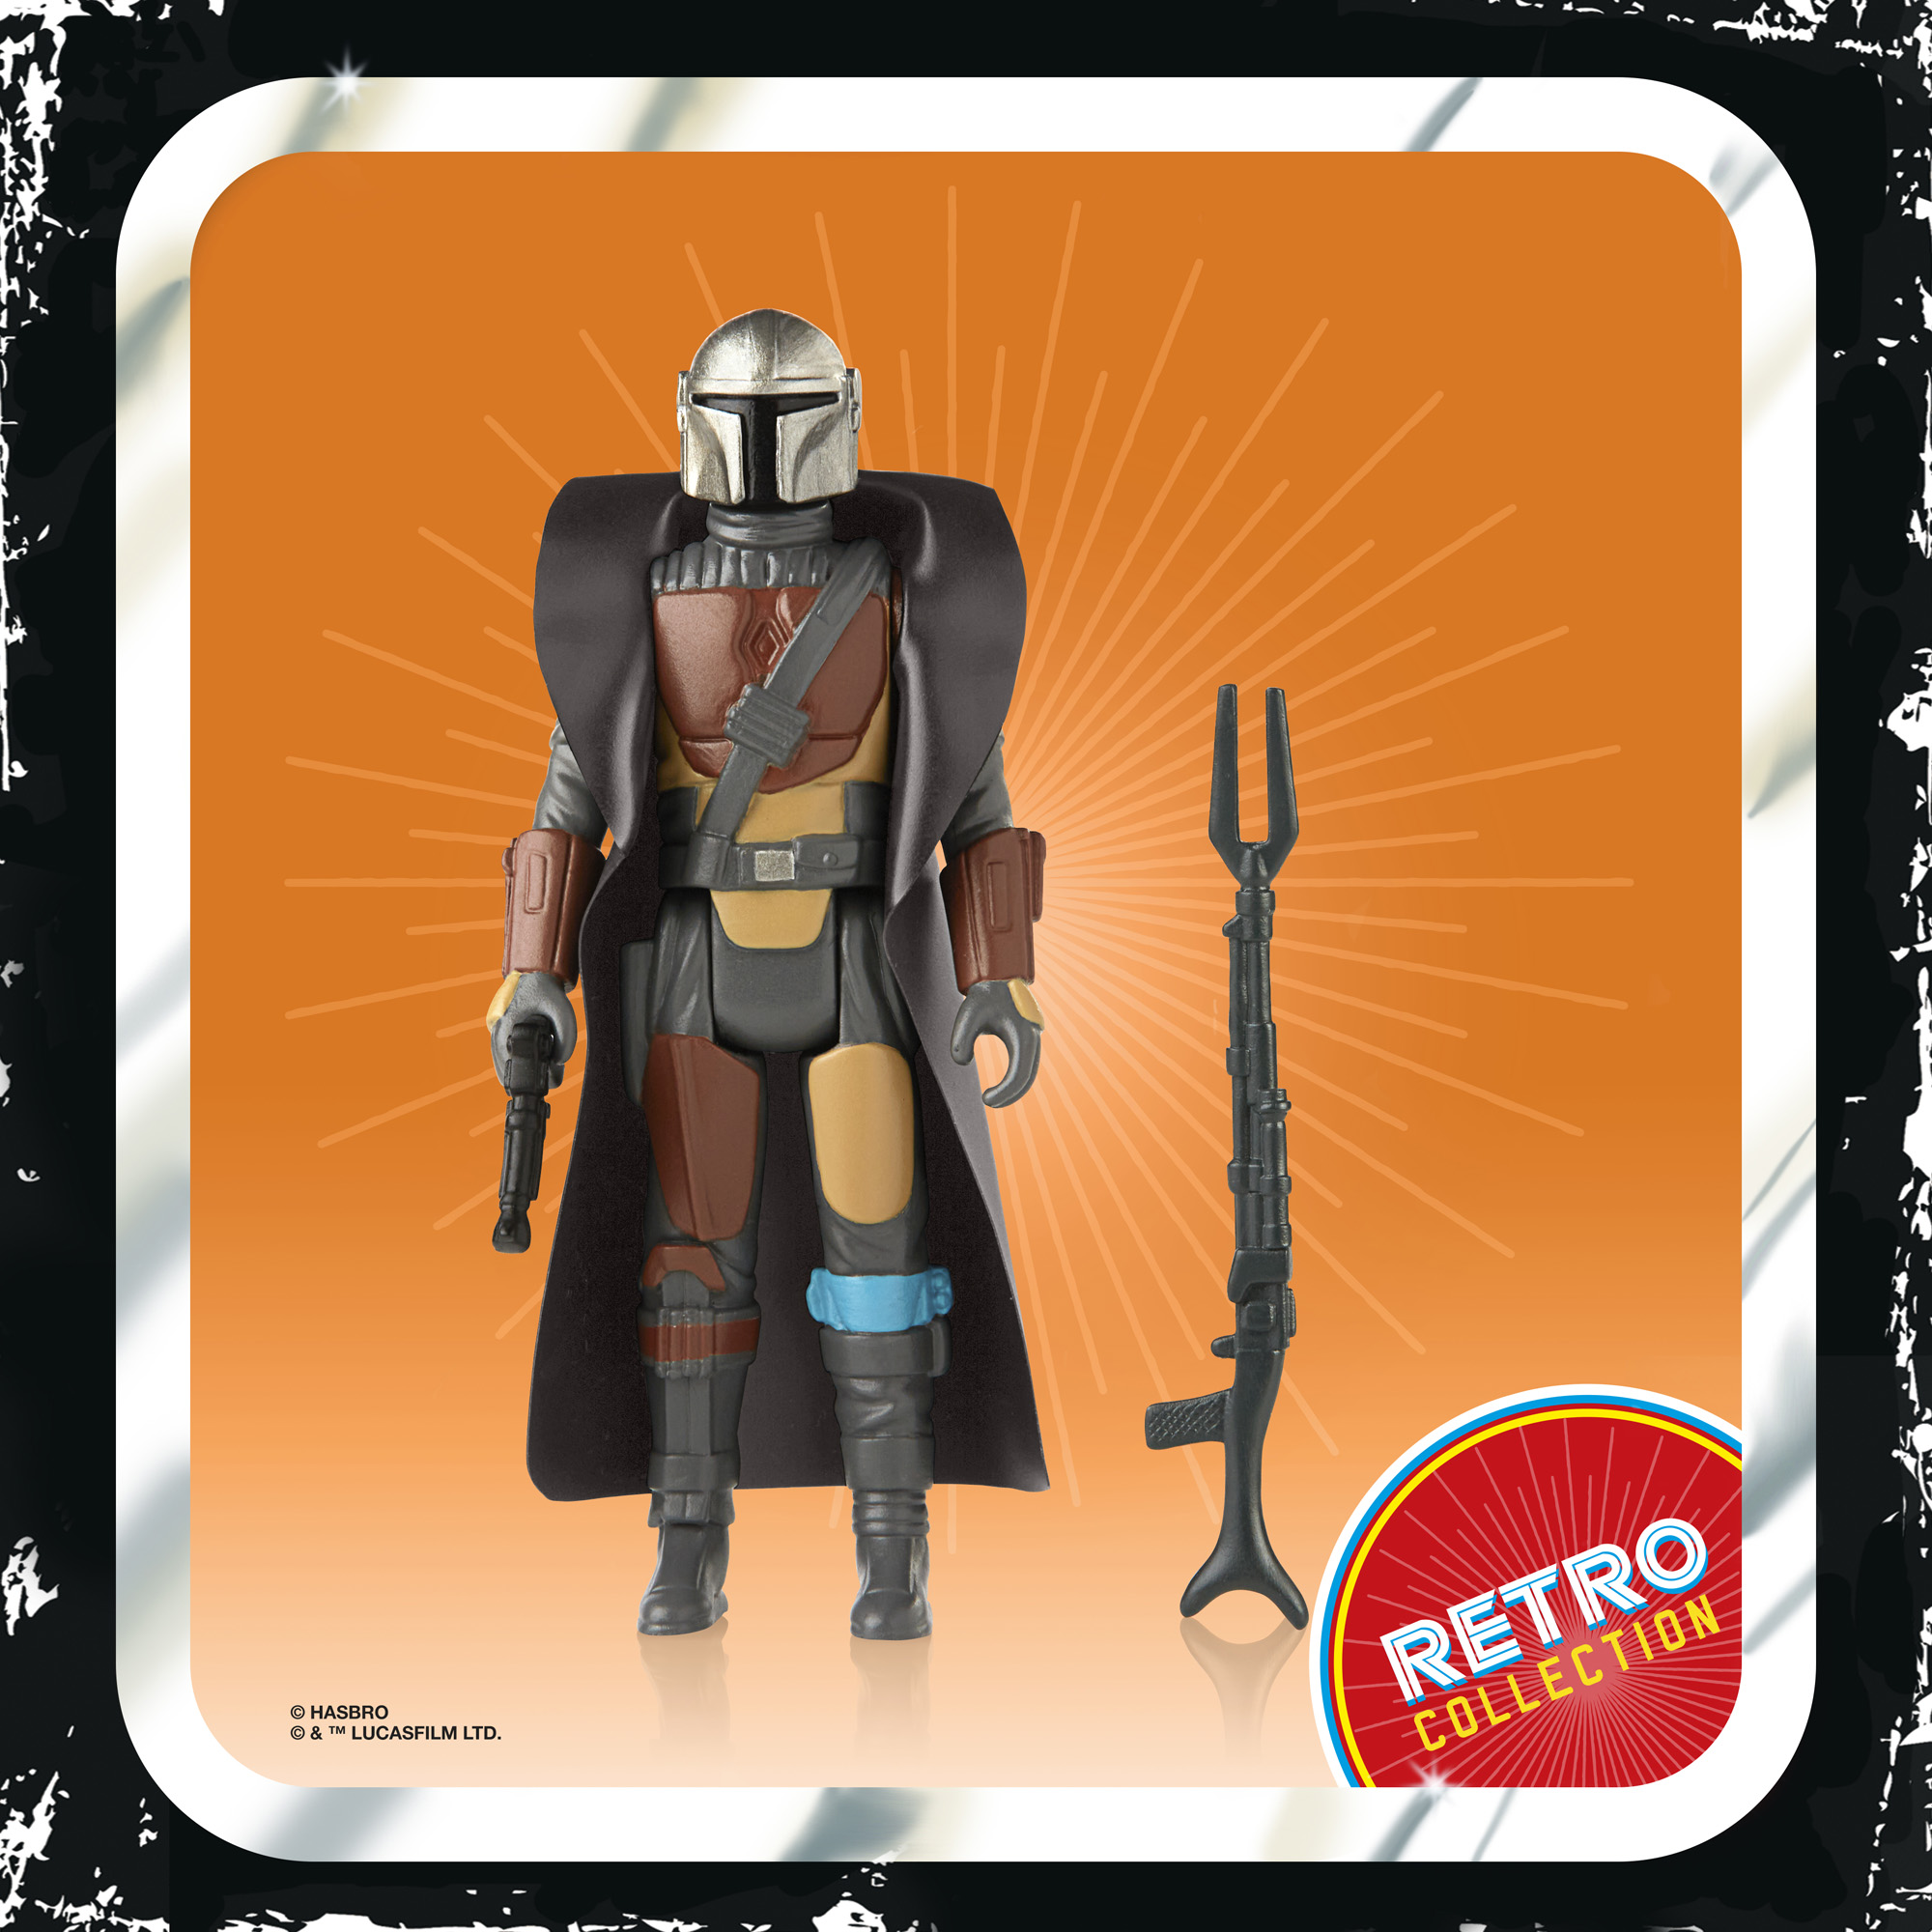 Star Wars The Mandalorian The Retro Collection Action Figures Wave 1 Assortment (8) (komplettes Case) F09375L00 5010993809295